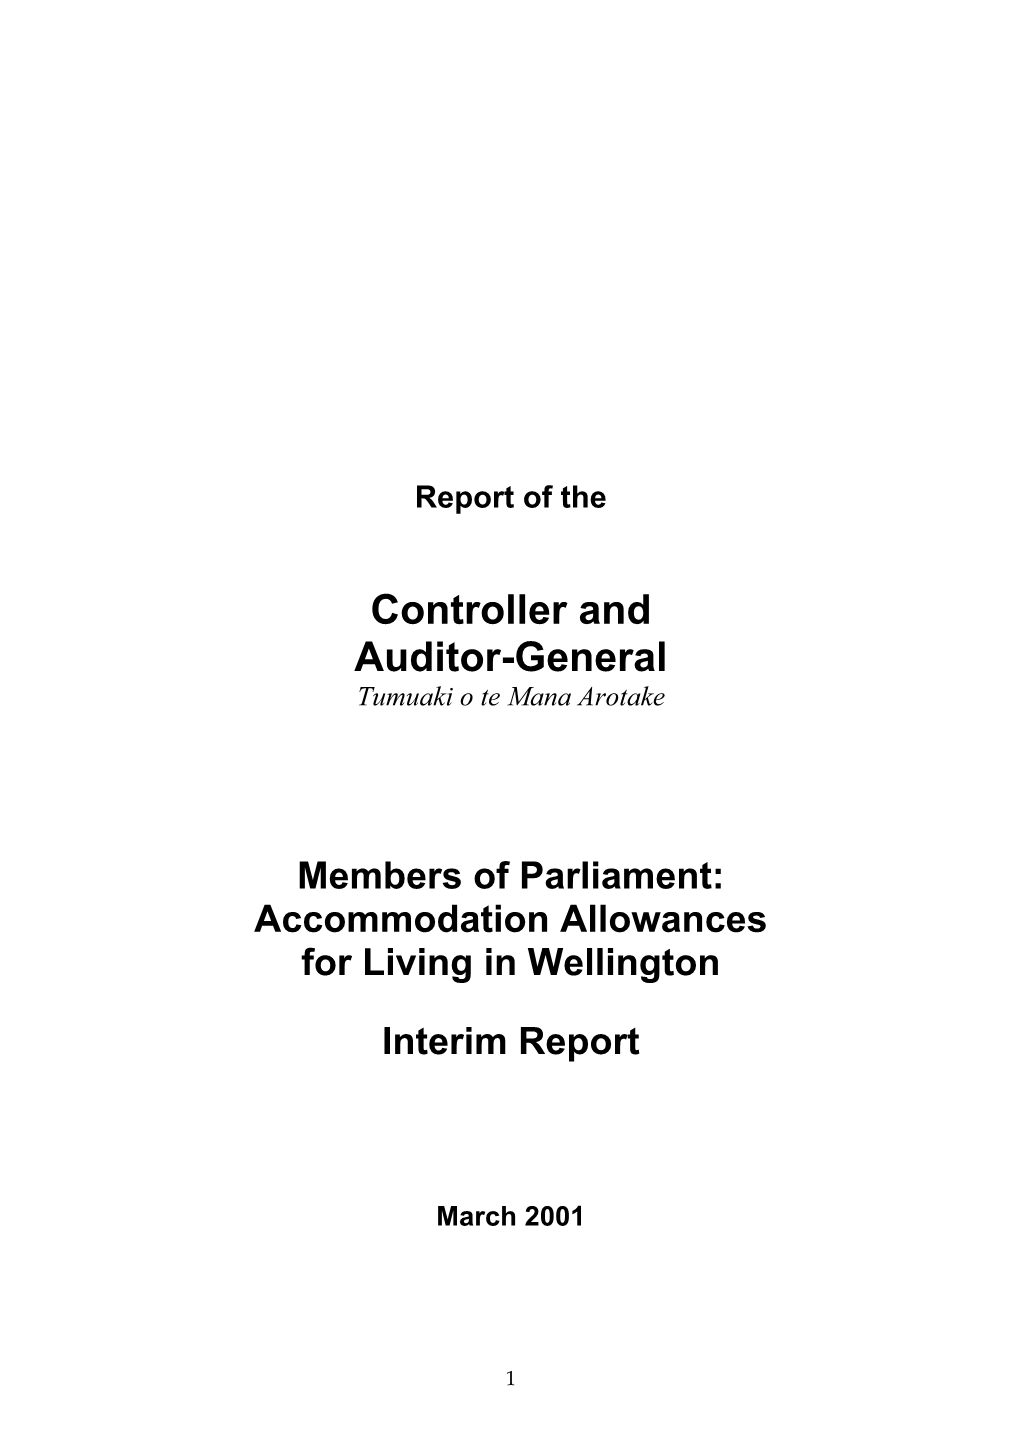 Members of Parliament: Accommodation Allowances for Living in Wellington